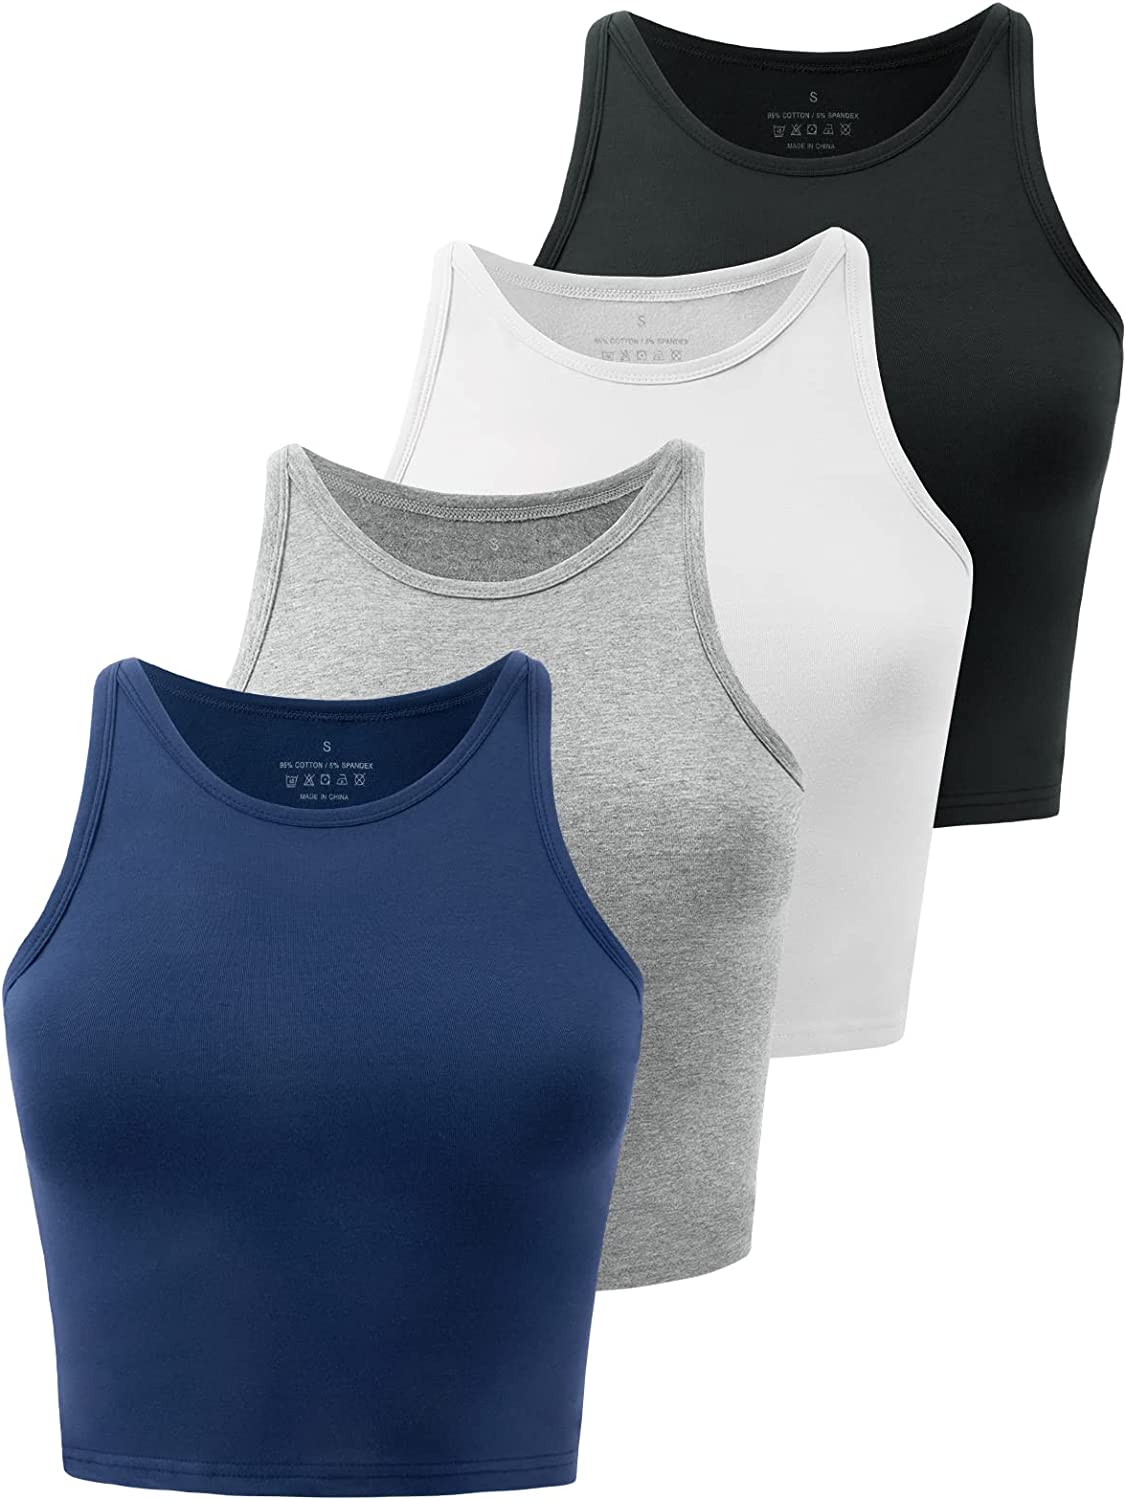 Kole Meego Crop Tops for Women Workout Cropped Tank Top High Neck Camisole  Yoga